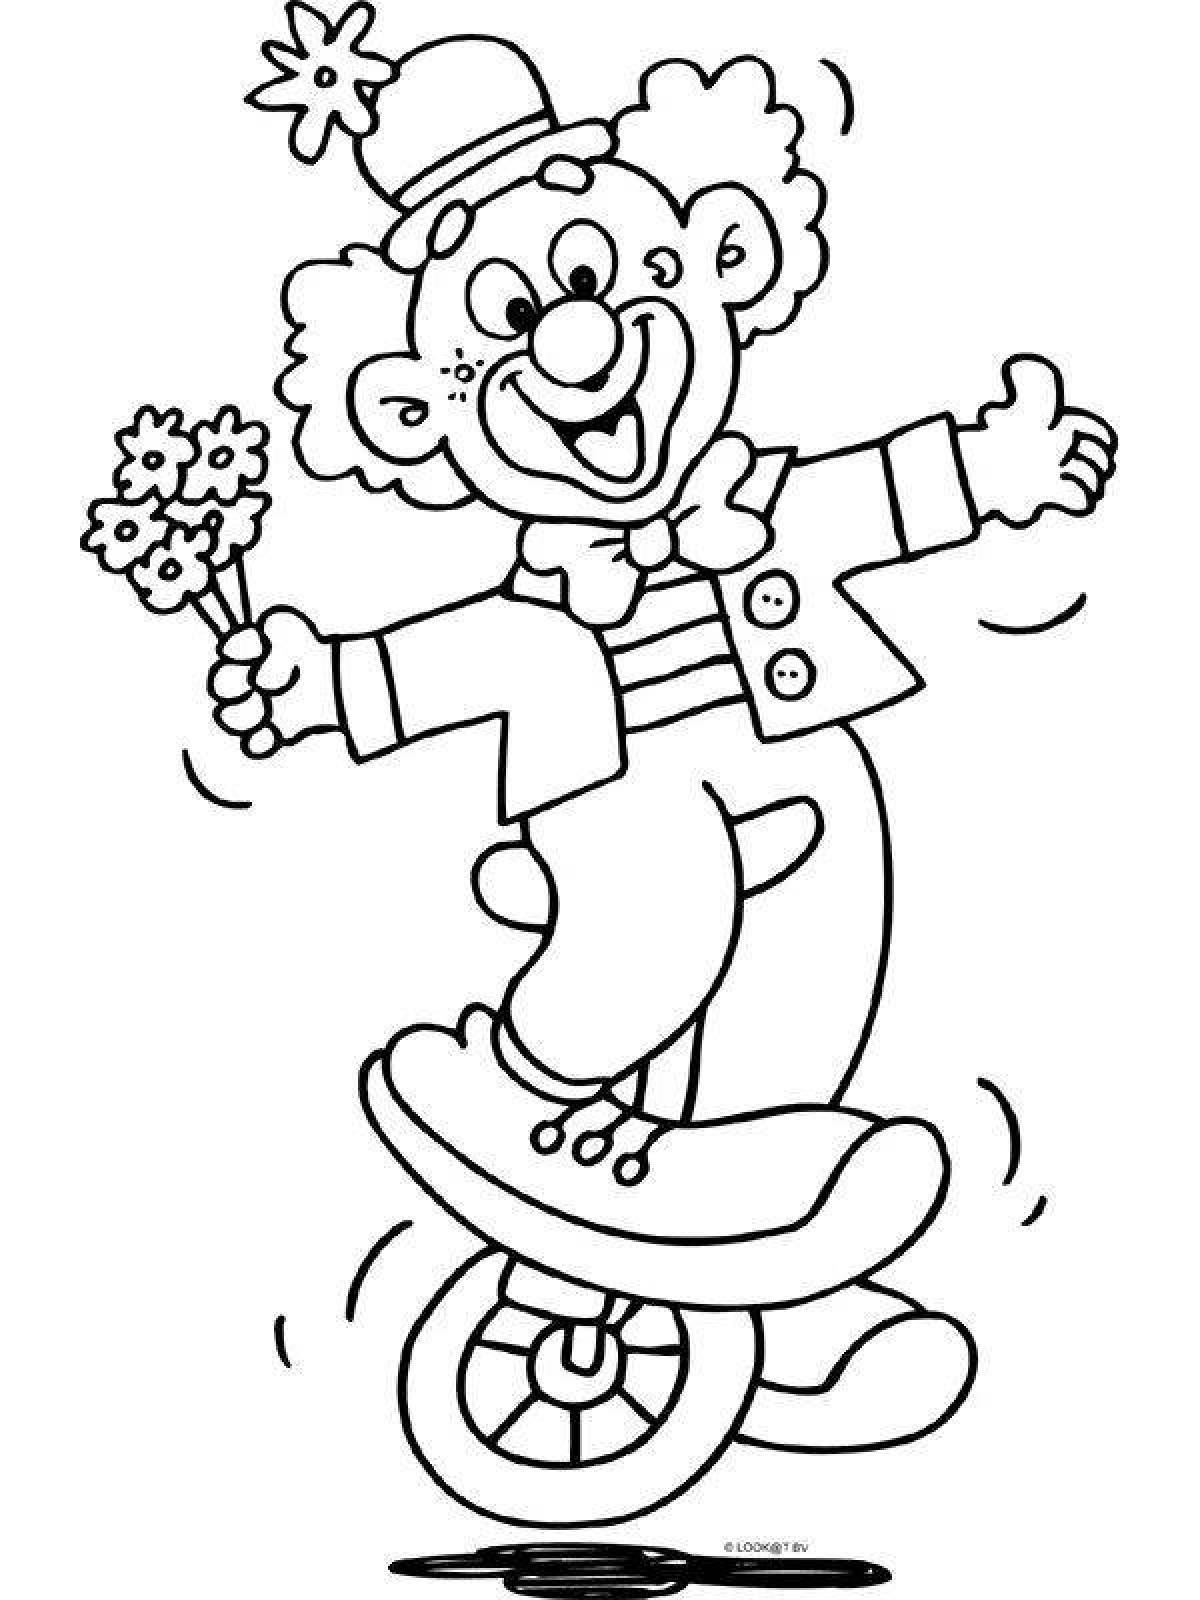 Bright clown coloring book for kids